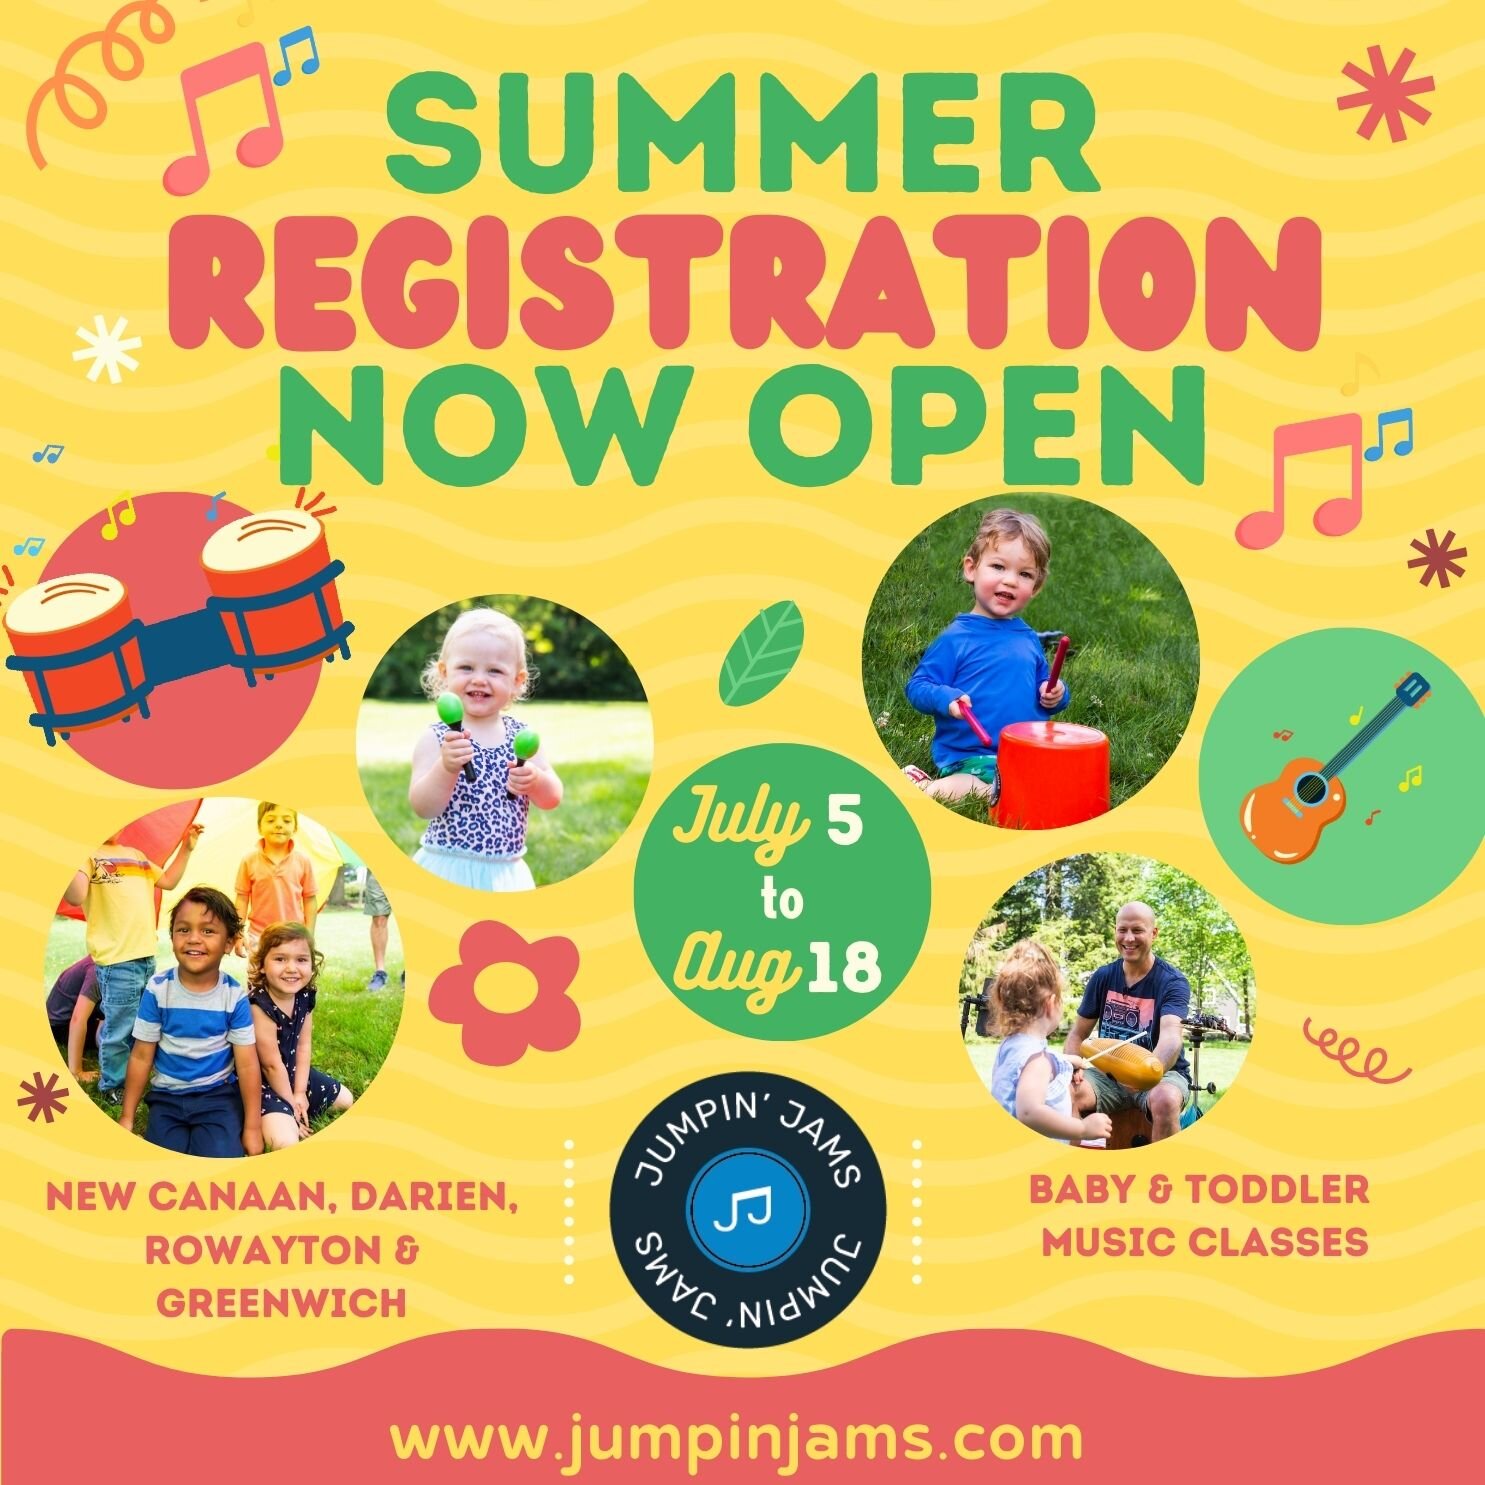 Summer registration is now OPEN!

The weather is getting warmer and we're so excited to start thinking about the summer session! 

The schedule is staying the same but we'll have a new location in Greenwich at the Greenwich Botanical Center!
Classes 